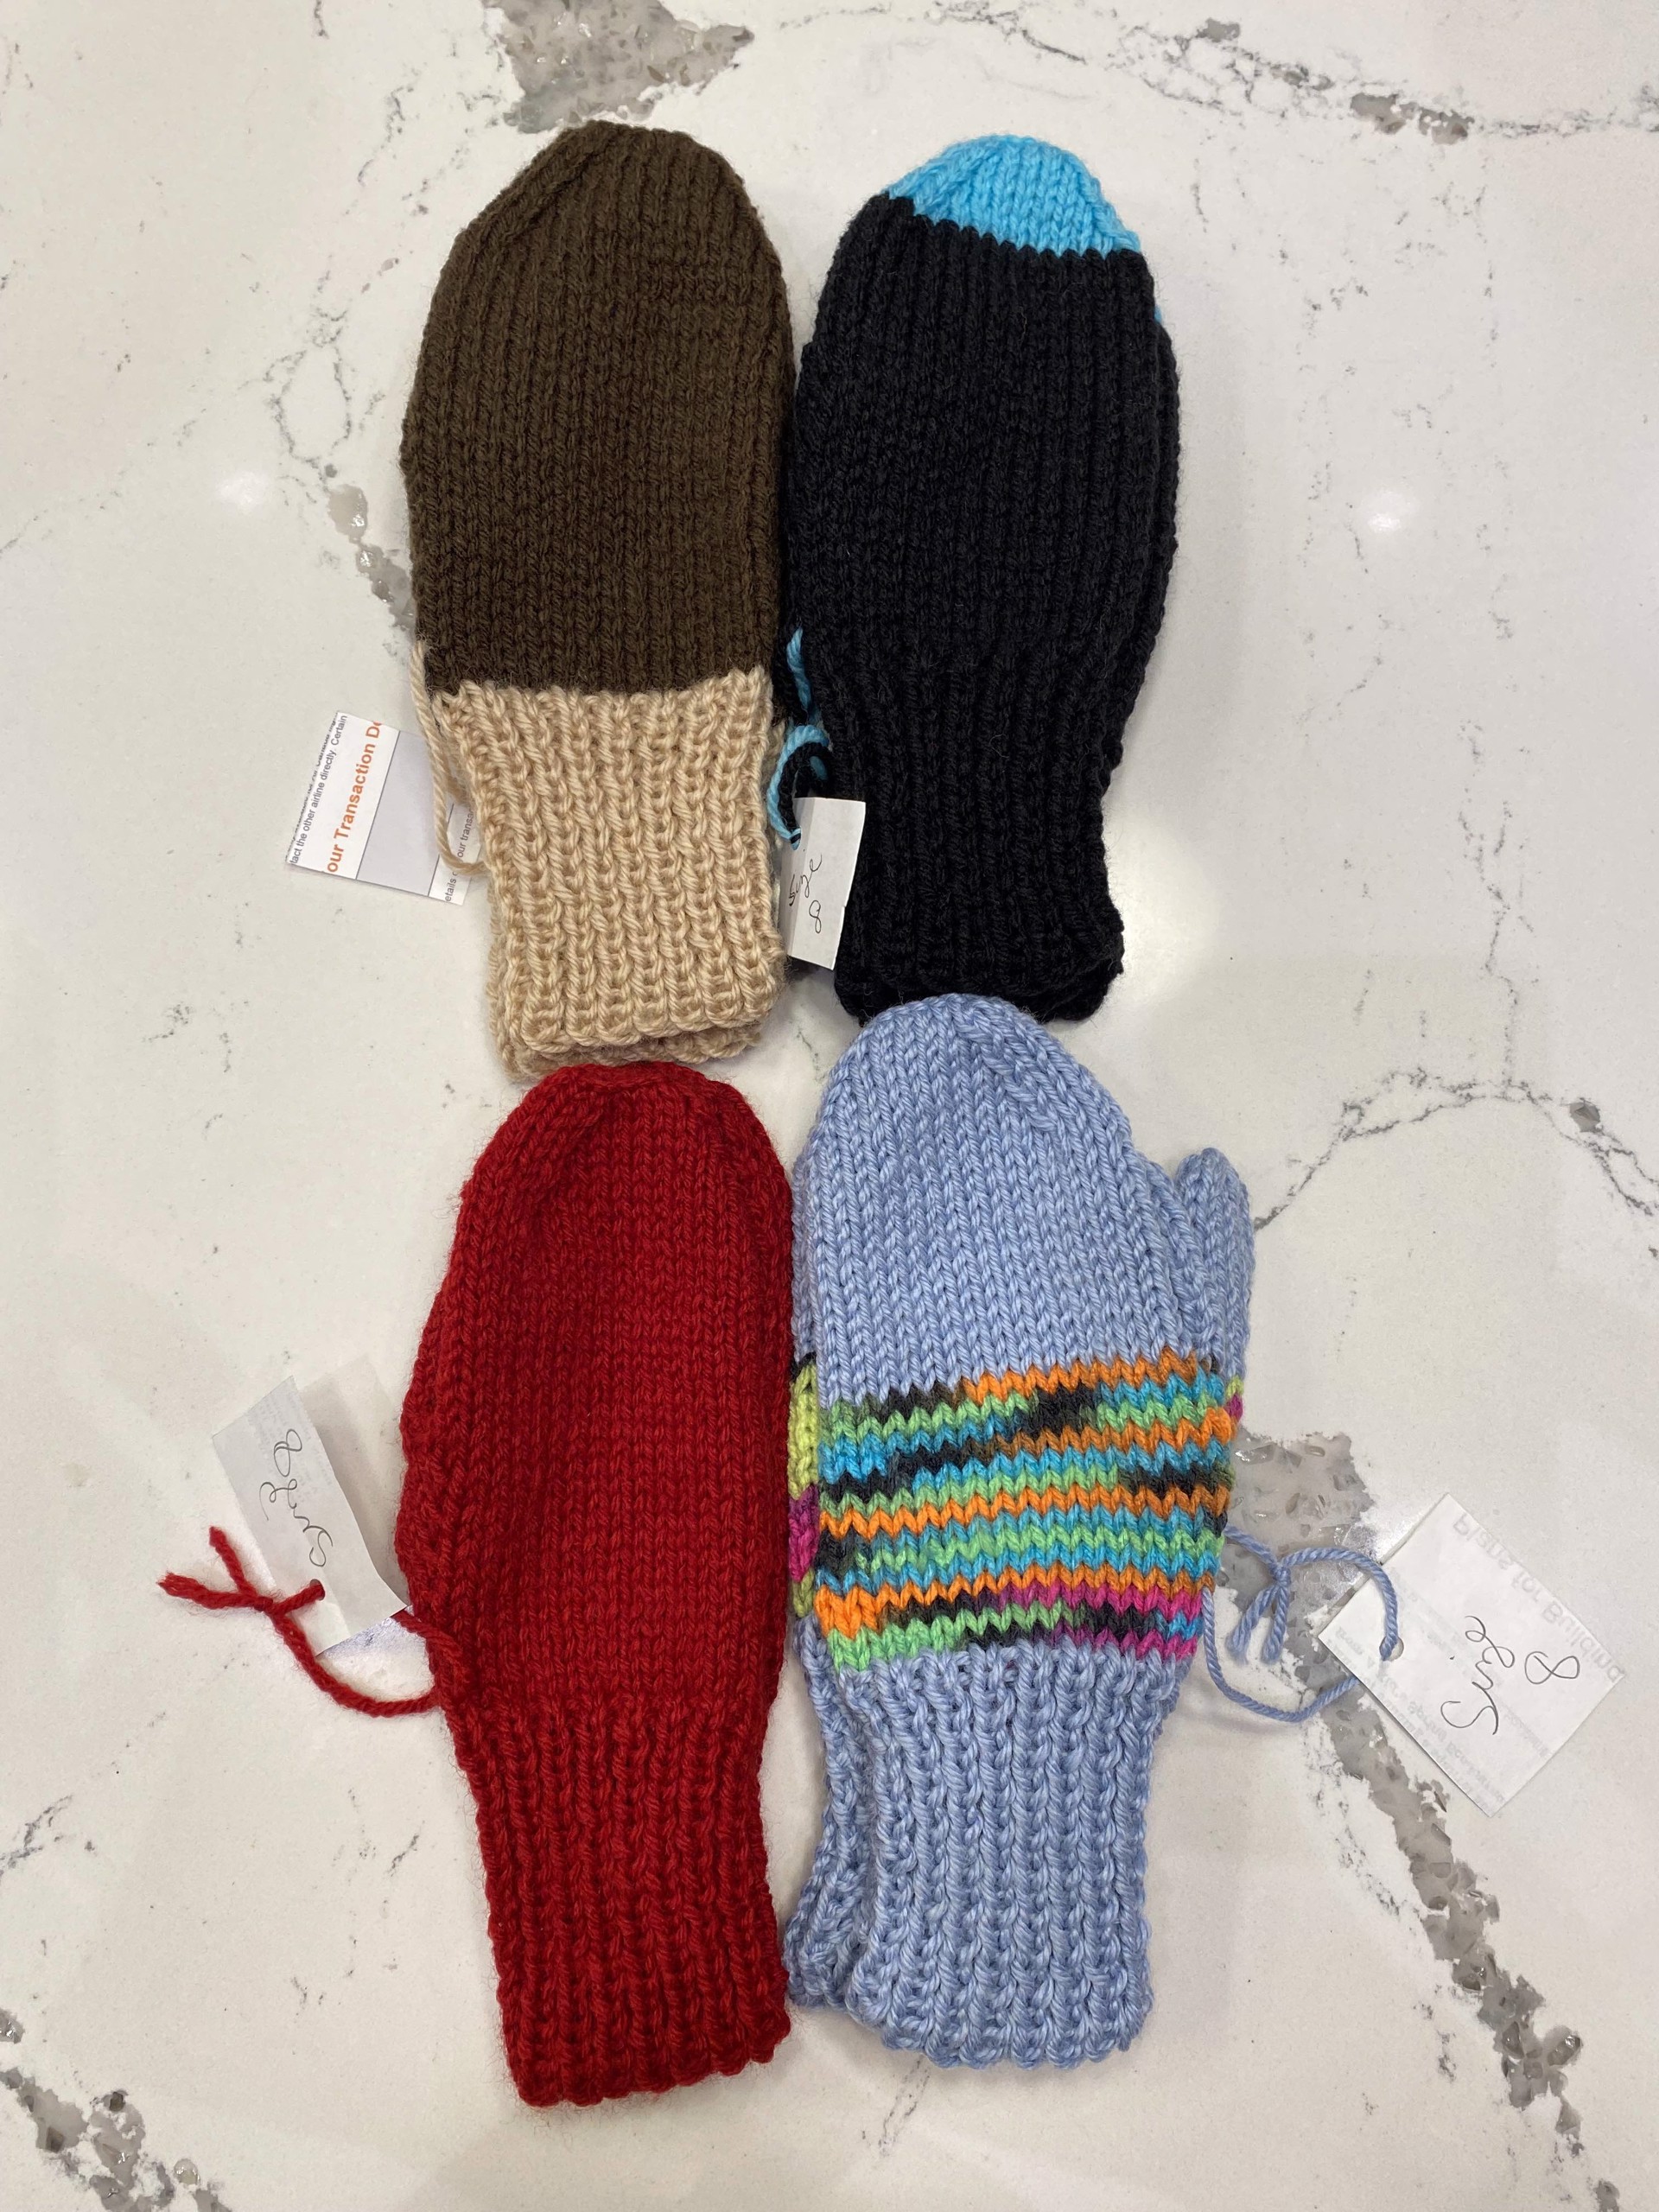 Handmade Mittens - Size 8 by Cathy Miller